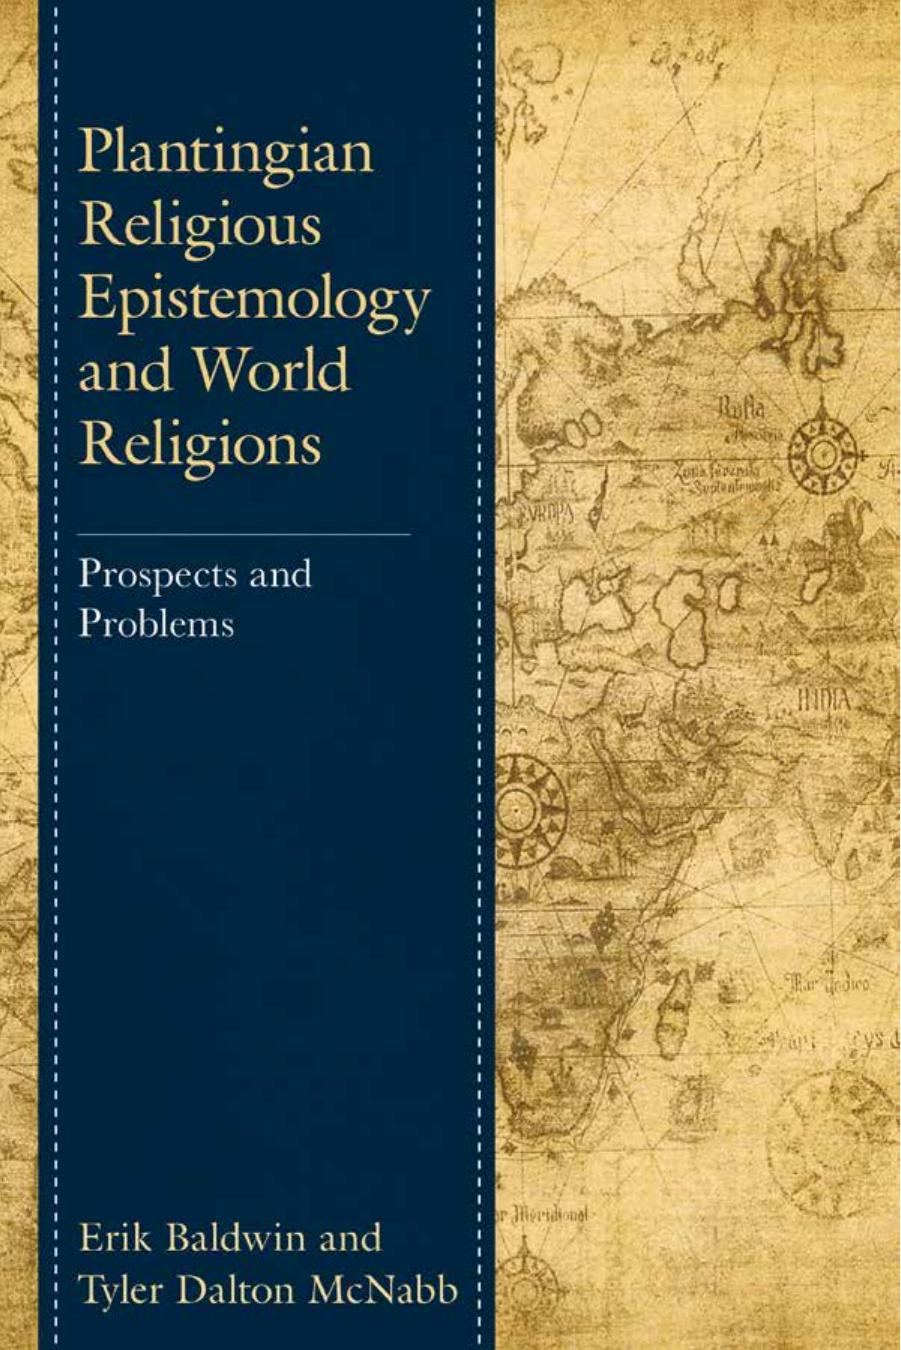 Plantingian Religious Epistemology and World Religions: Prospects and Problems